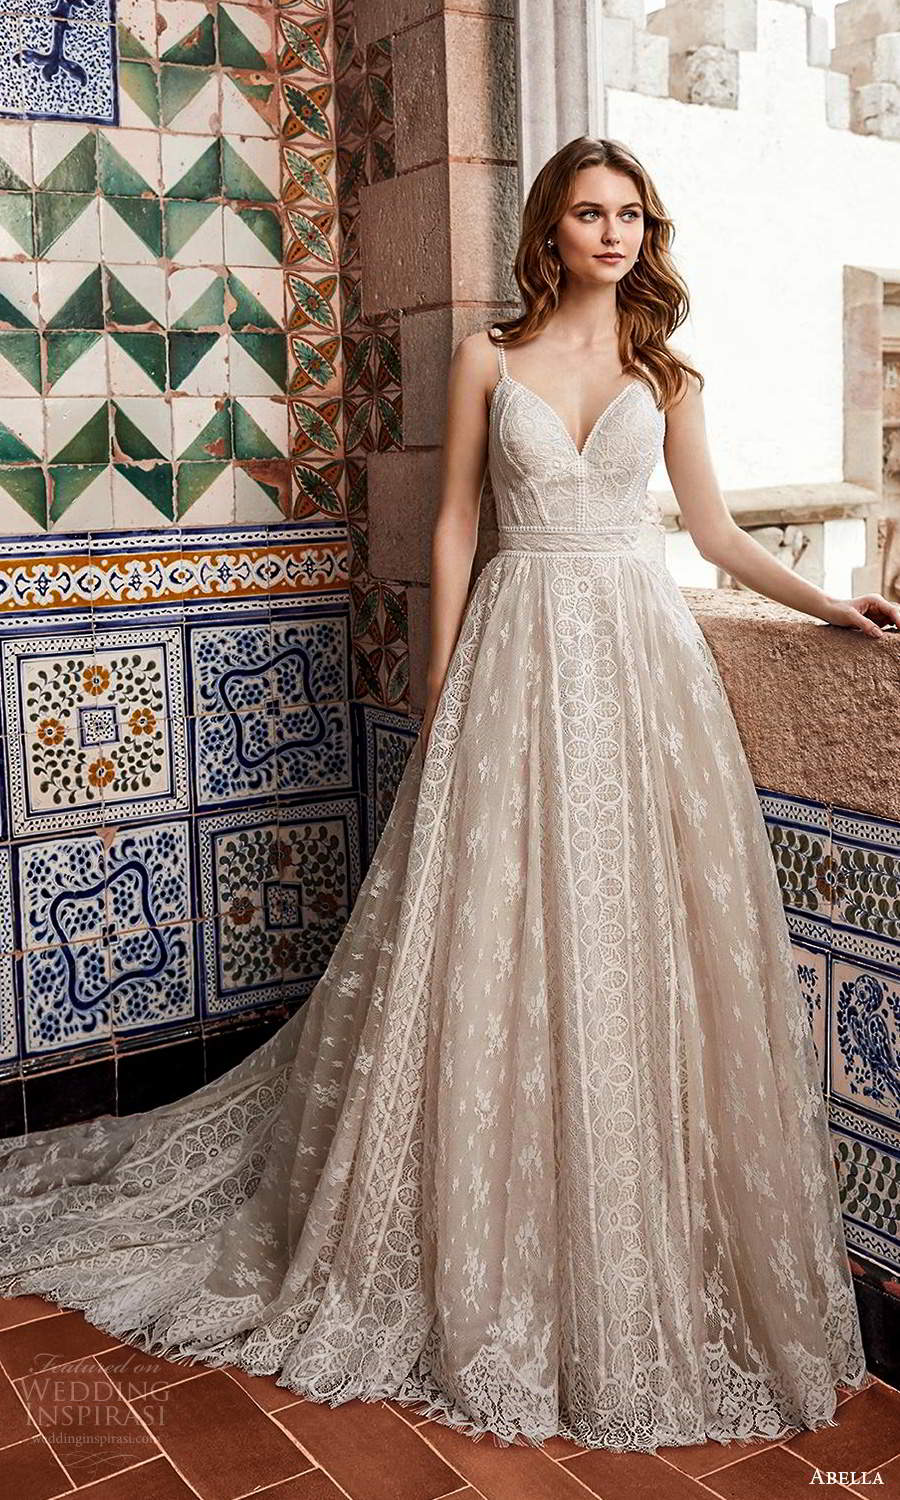 abella allure bridals 2020 bridal sleeveless straps sweetheart neckline fully embellished lace a line ball gown wedding dress chapel train (4) mv